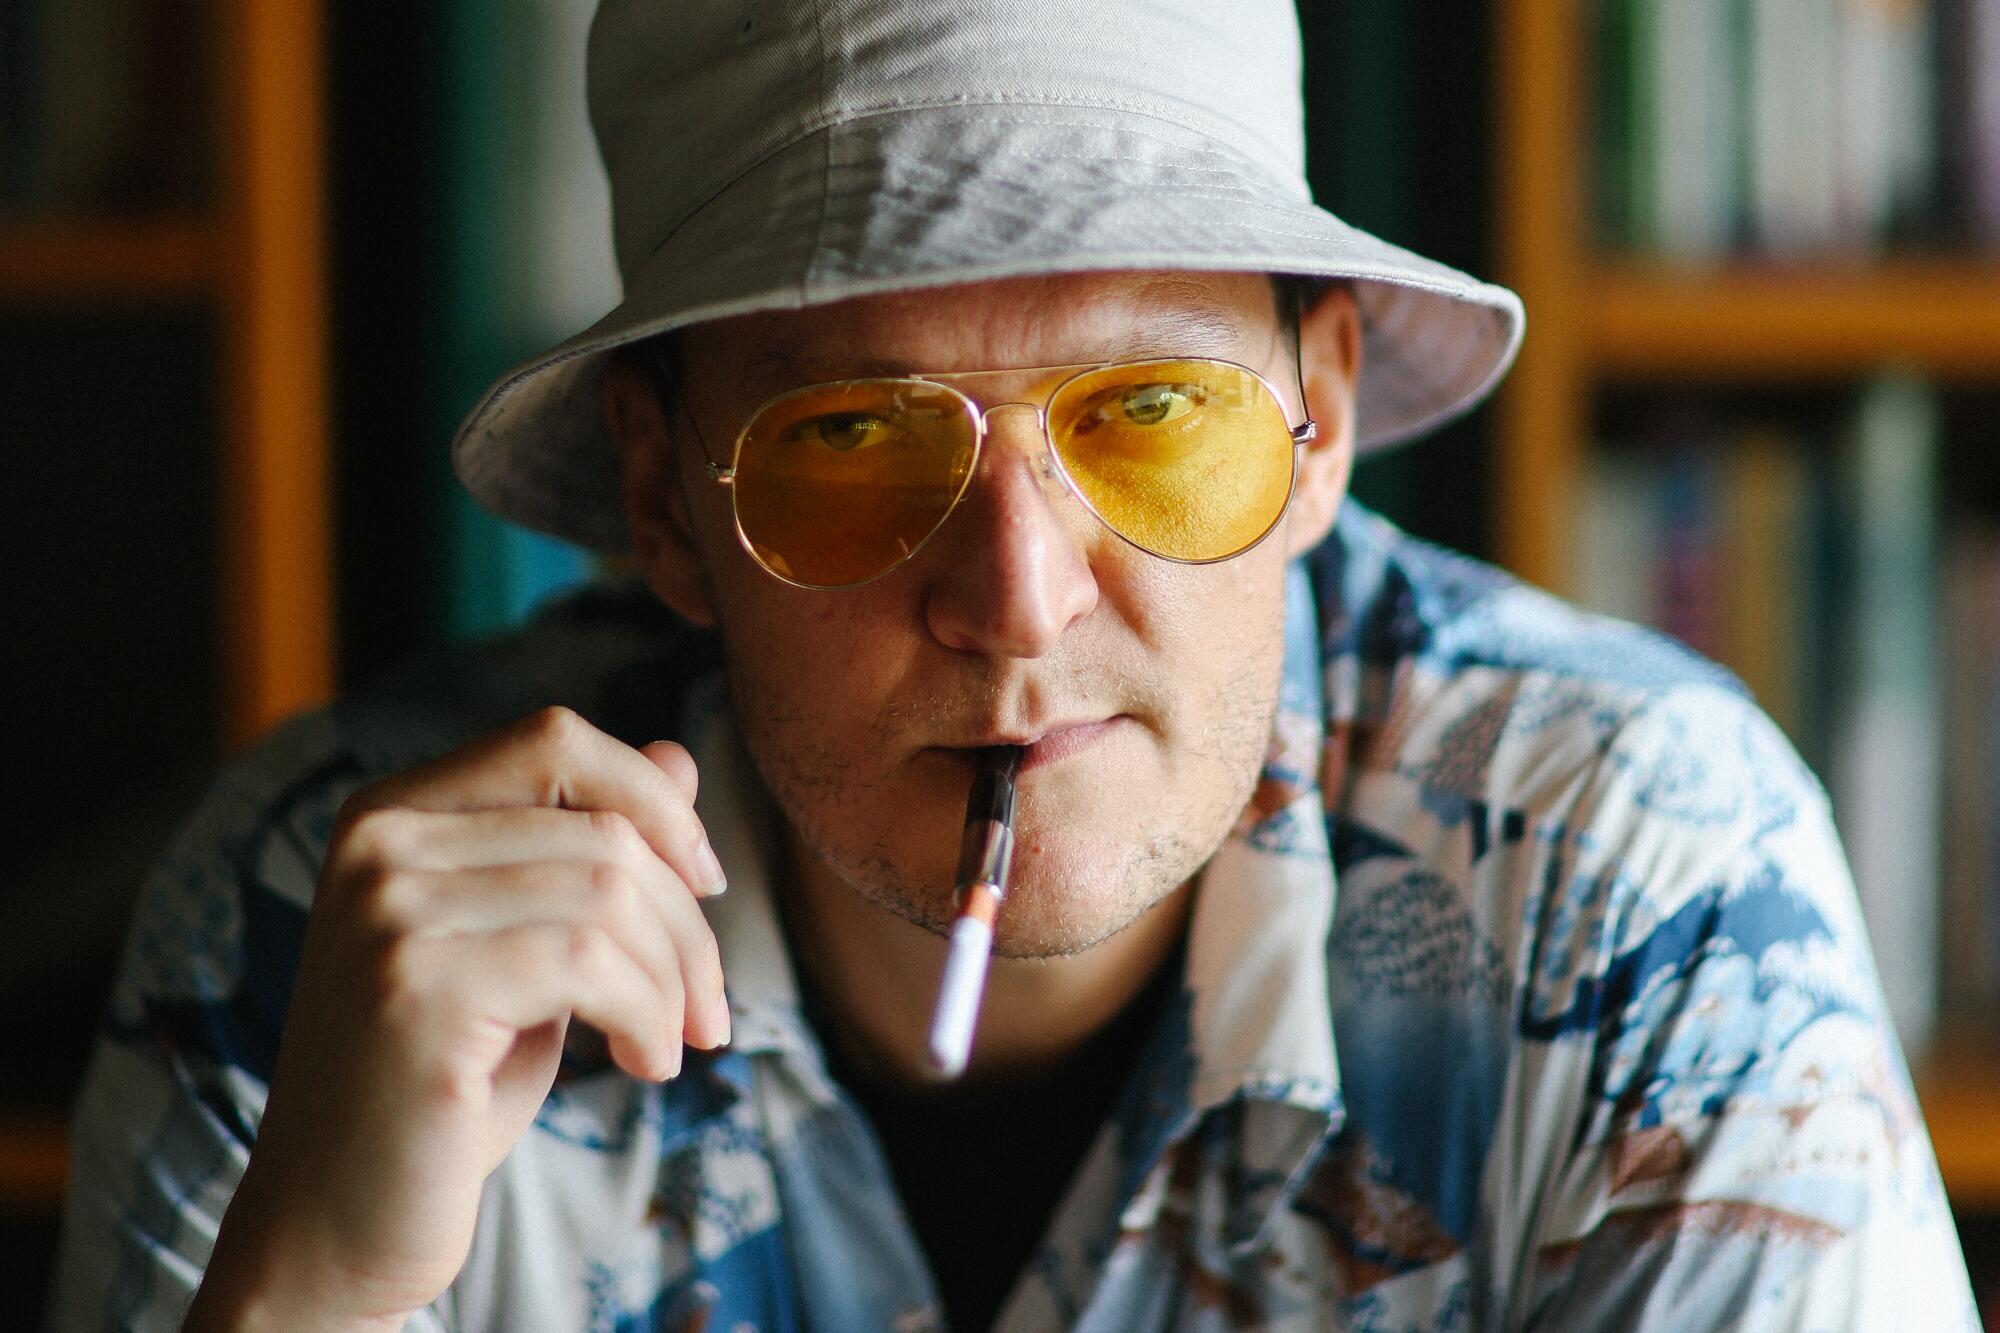 A man in a hat and sunglasses, with a cigarette holder in his mouth